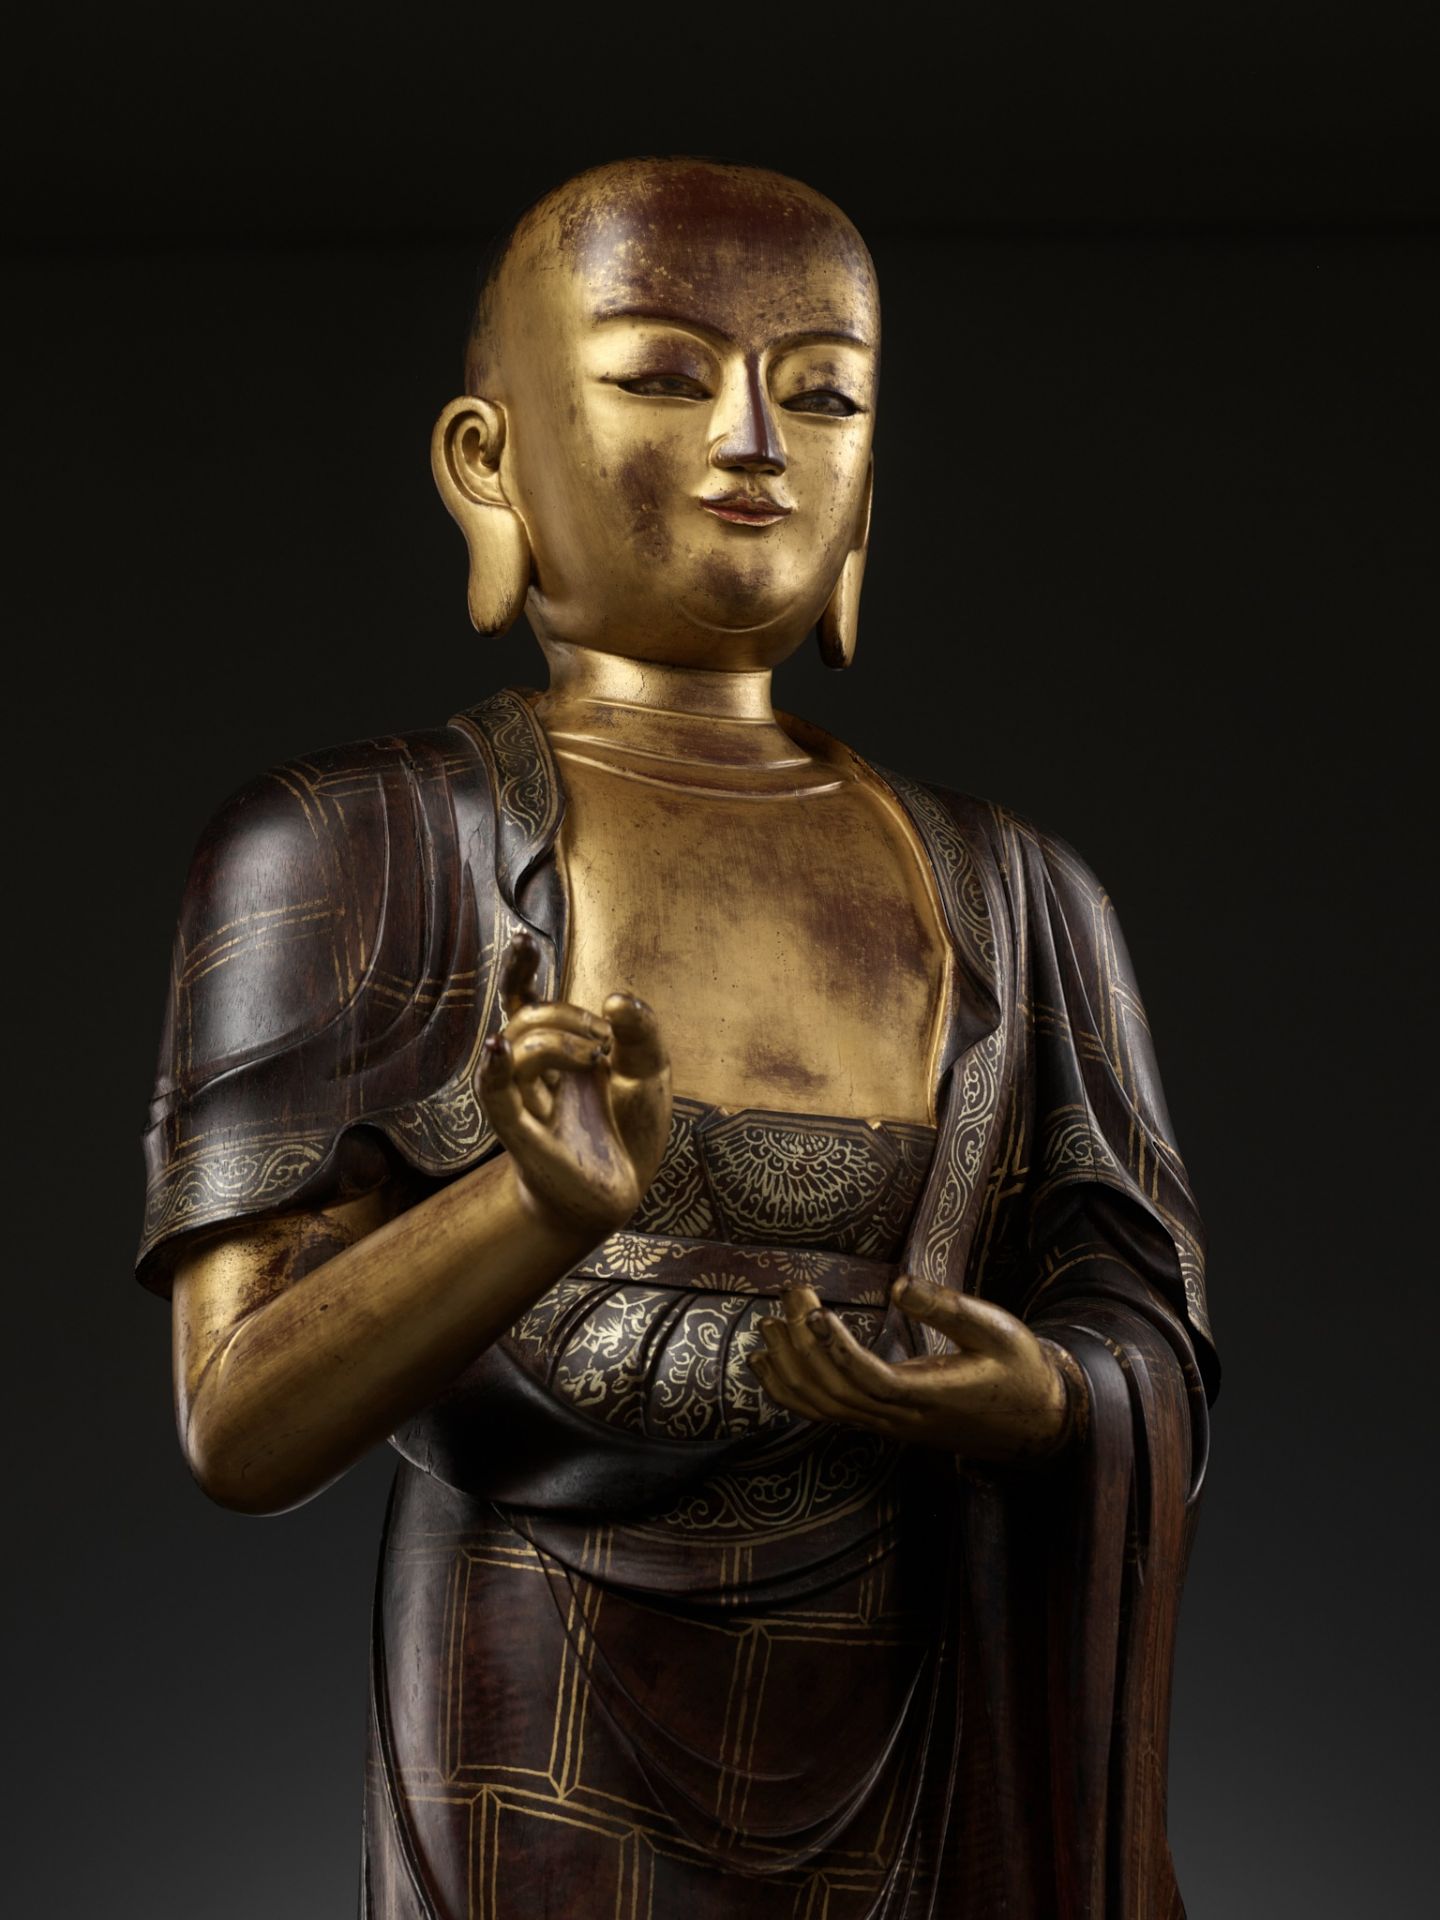 A LARGE AND HIGHLY IMPORTANT ZITAN AND GILT-LACQUERED STATUE OF SARIPUTRA, THE FIRST OF BUDDHA'S TWO